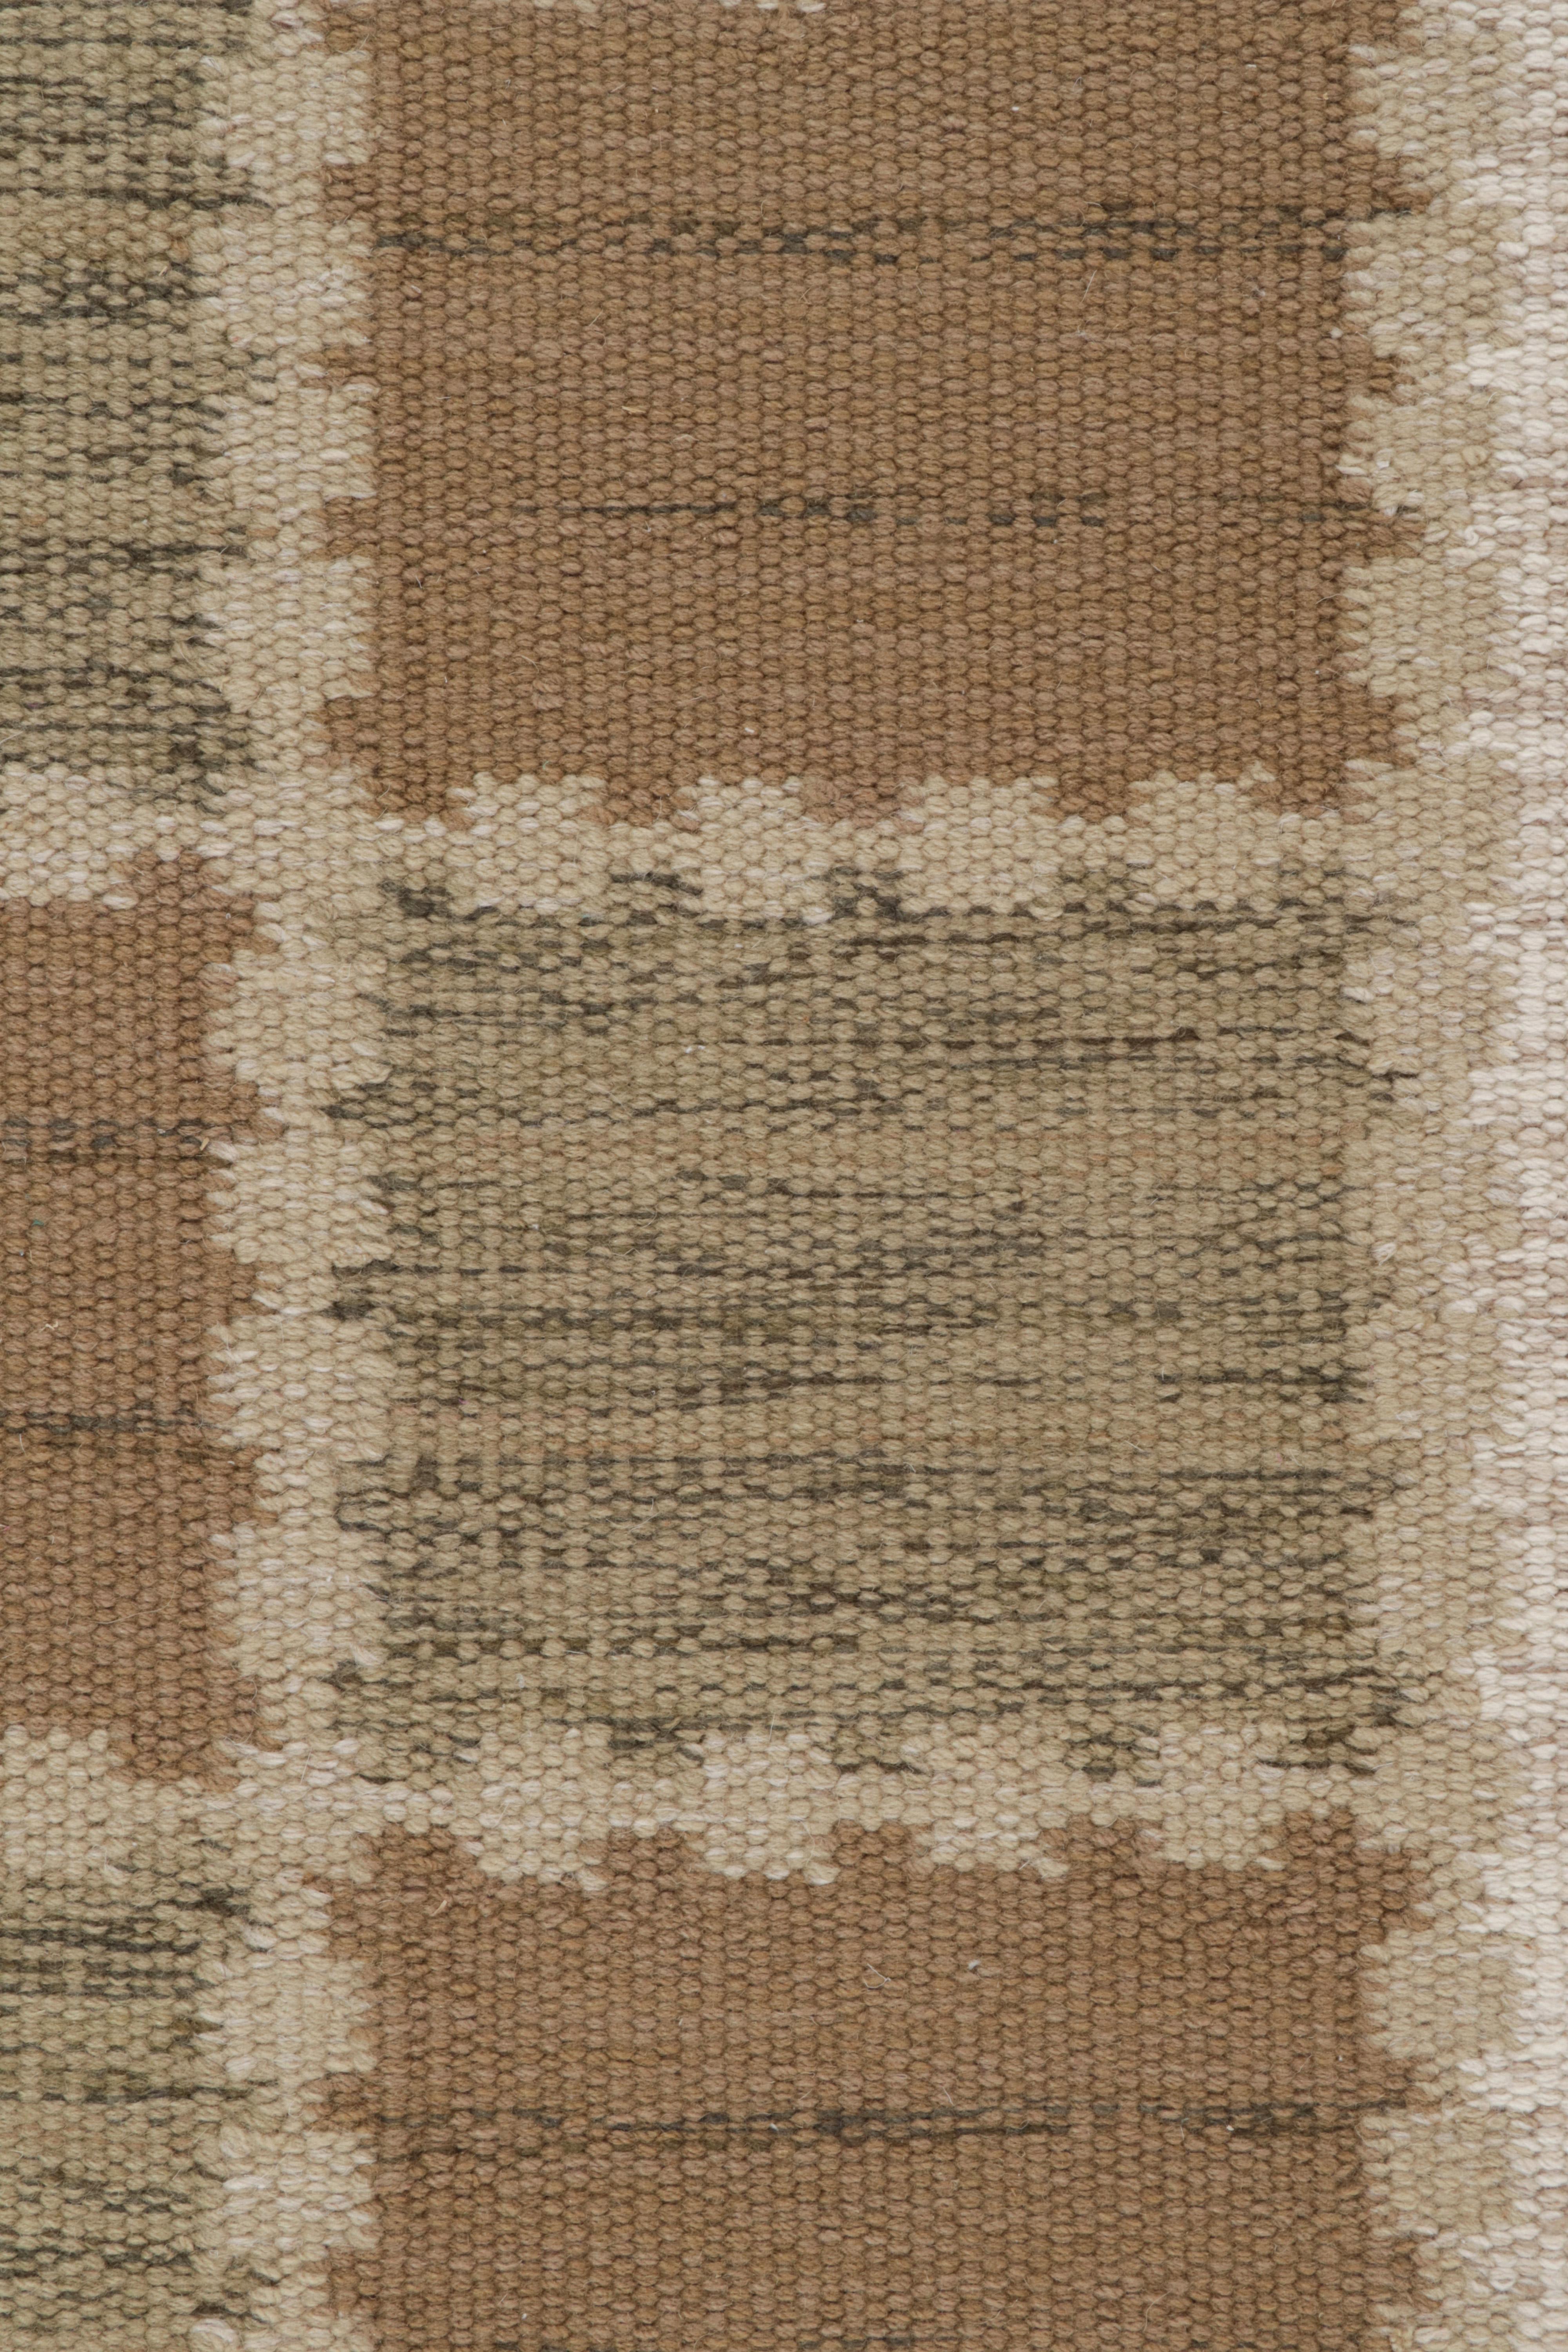 Hand-Knotted Rug & Kilim's Scandinavian Style Kilim in Beige-Brown, White Geometric Pattern For Sale